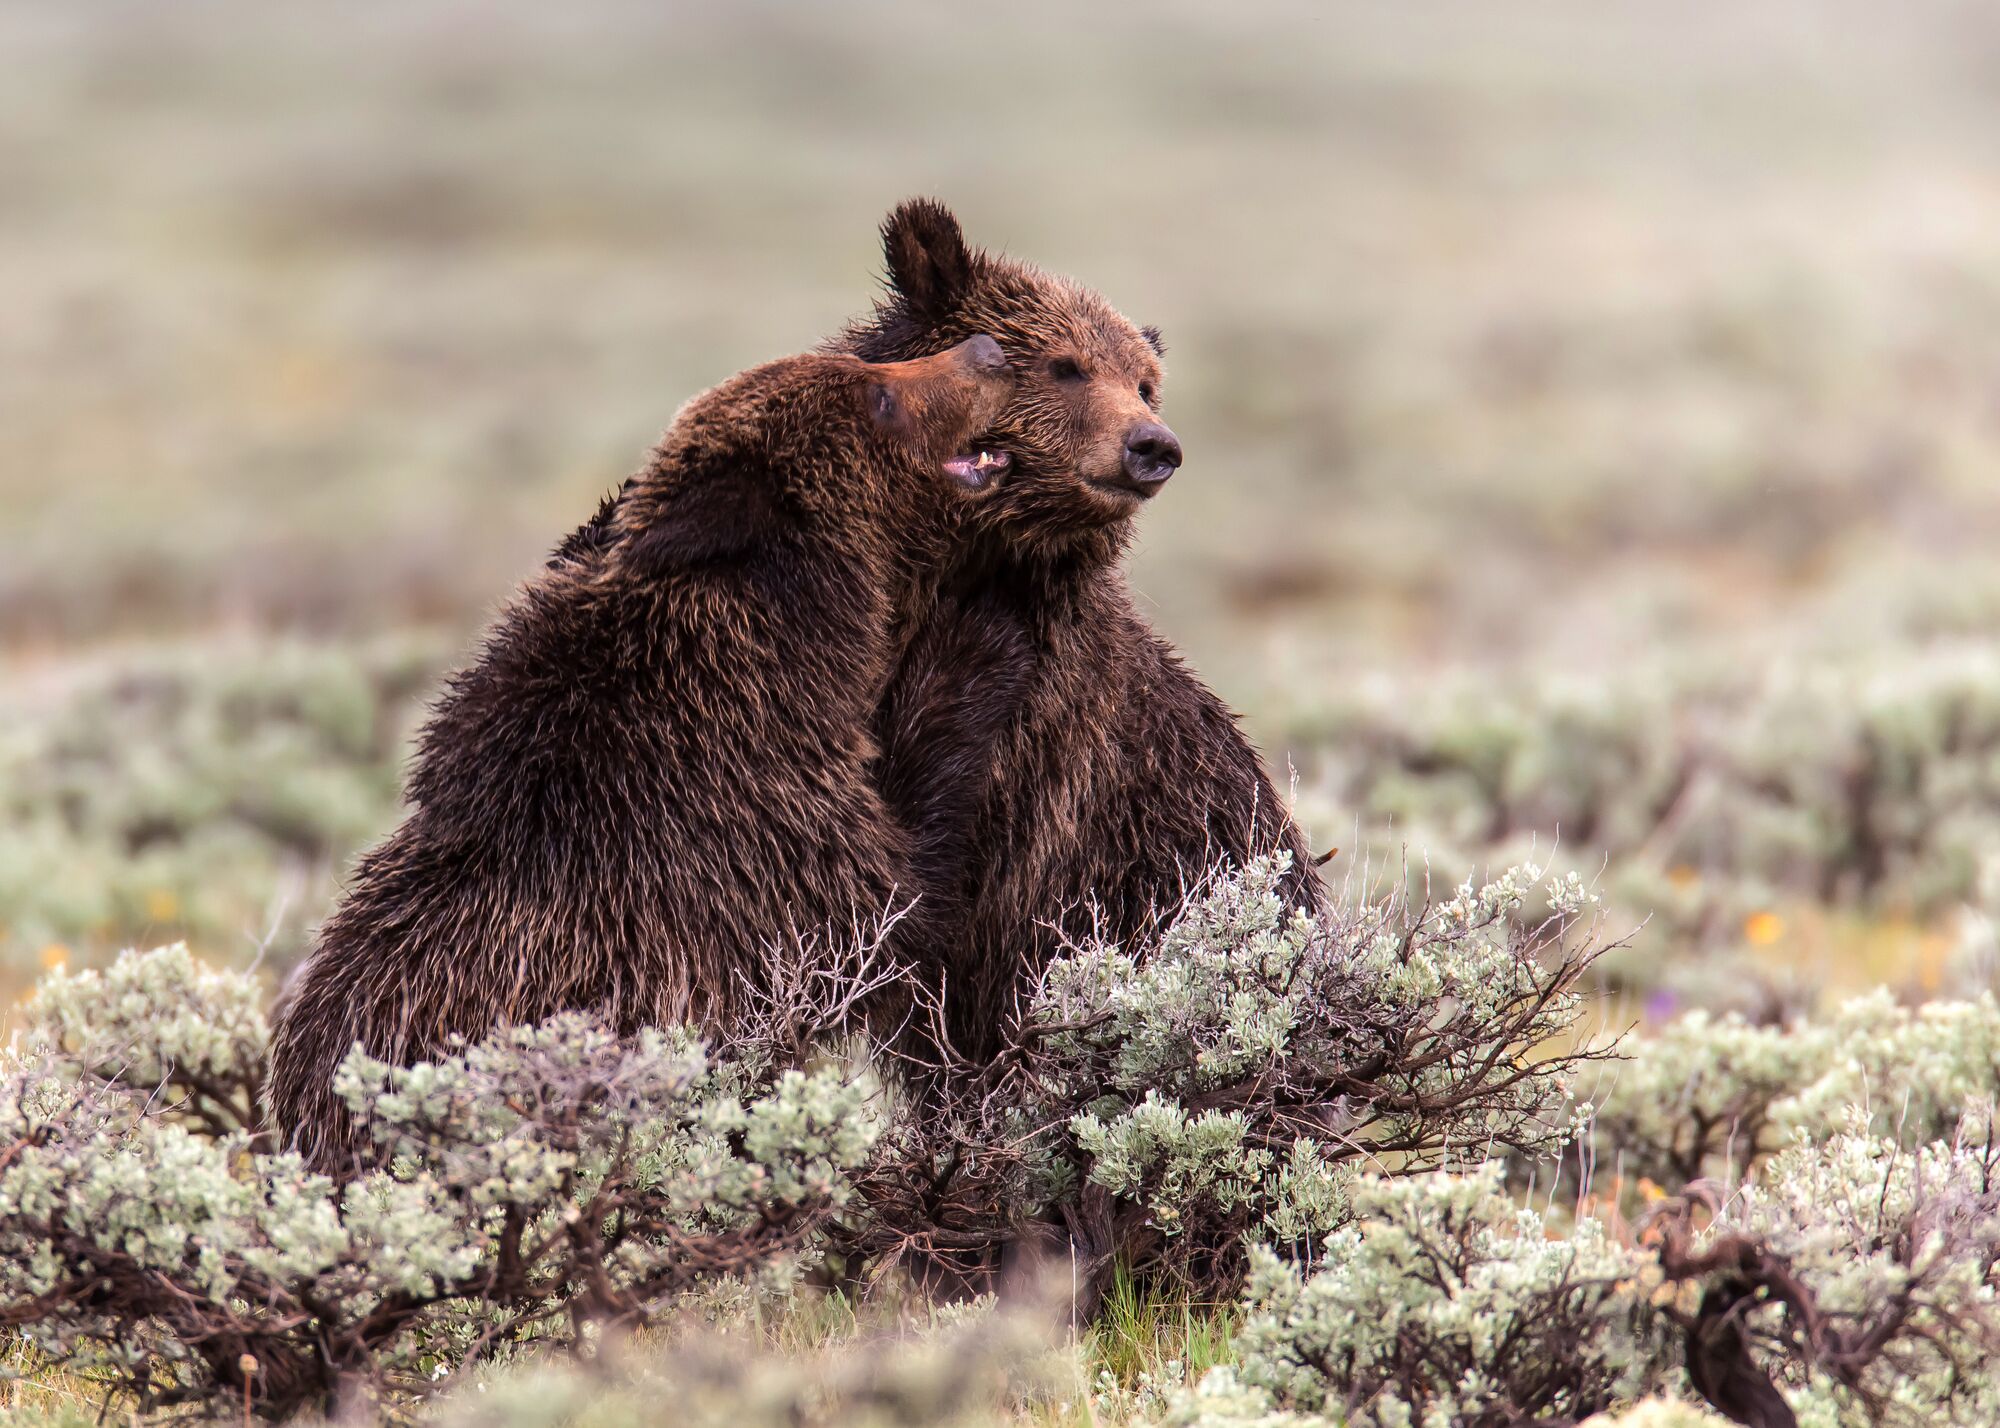 A pair of grizzly bears in Yellowstone National Park (Todaysfotos / Shutterstock)